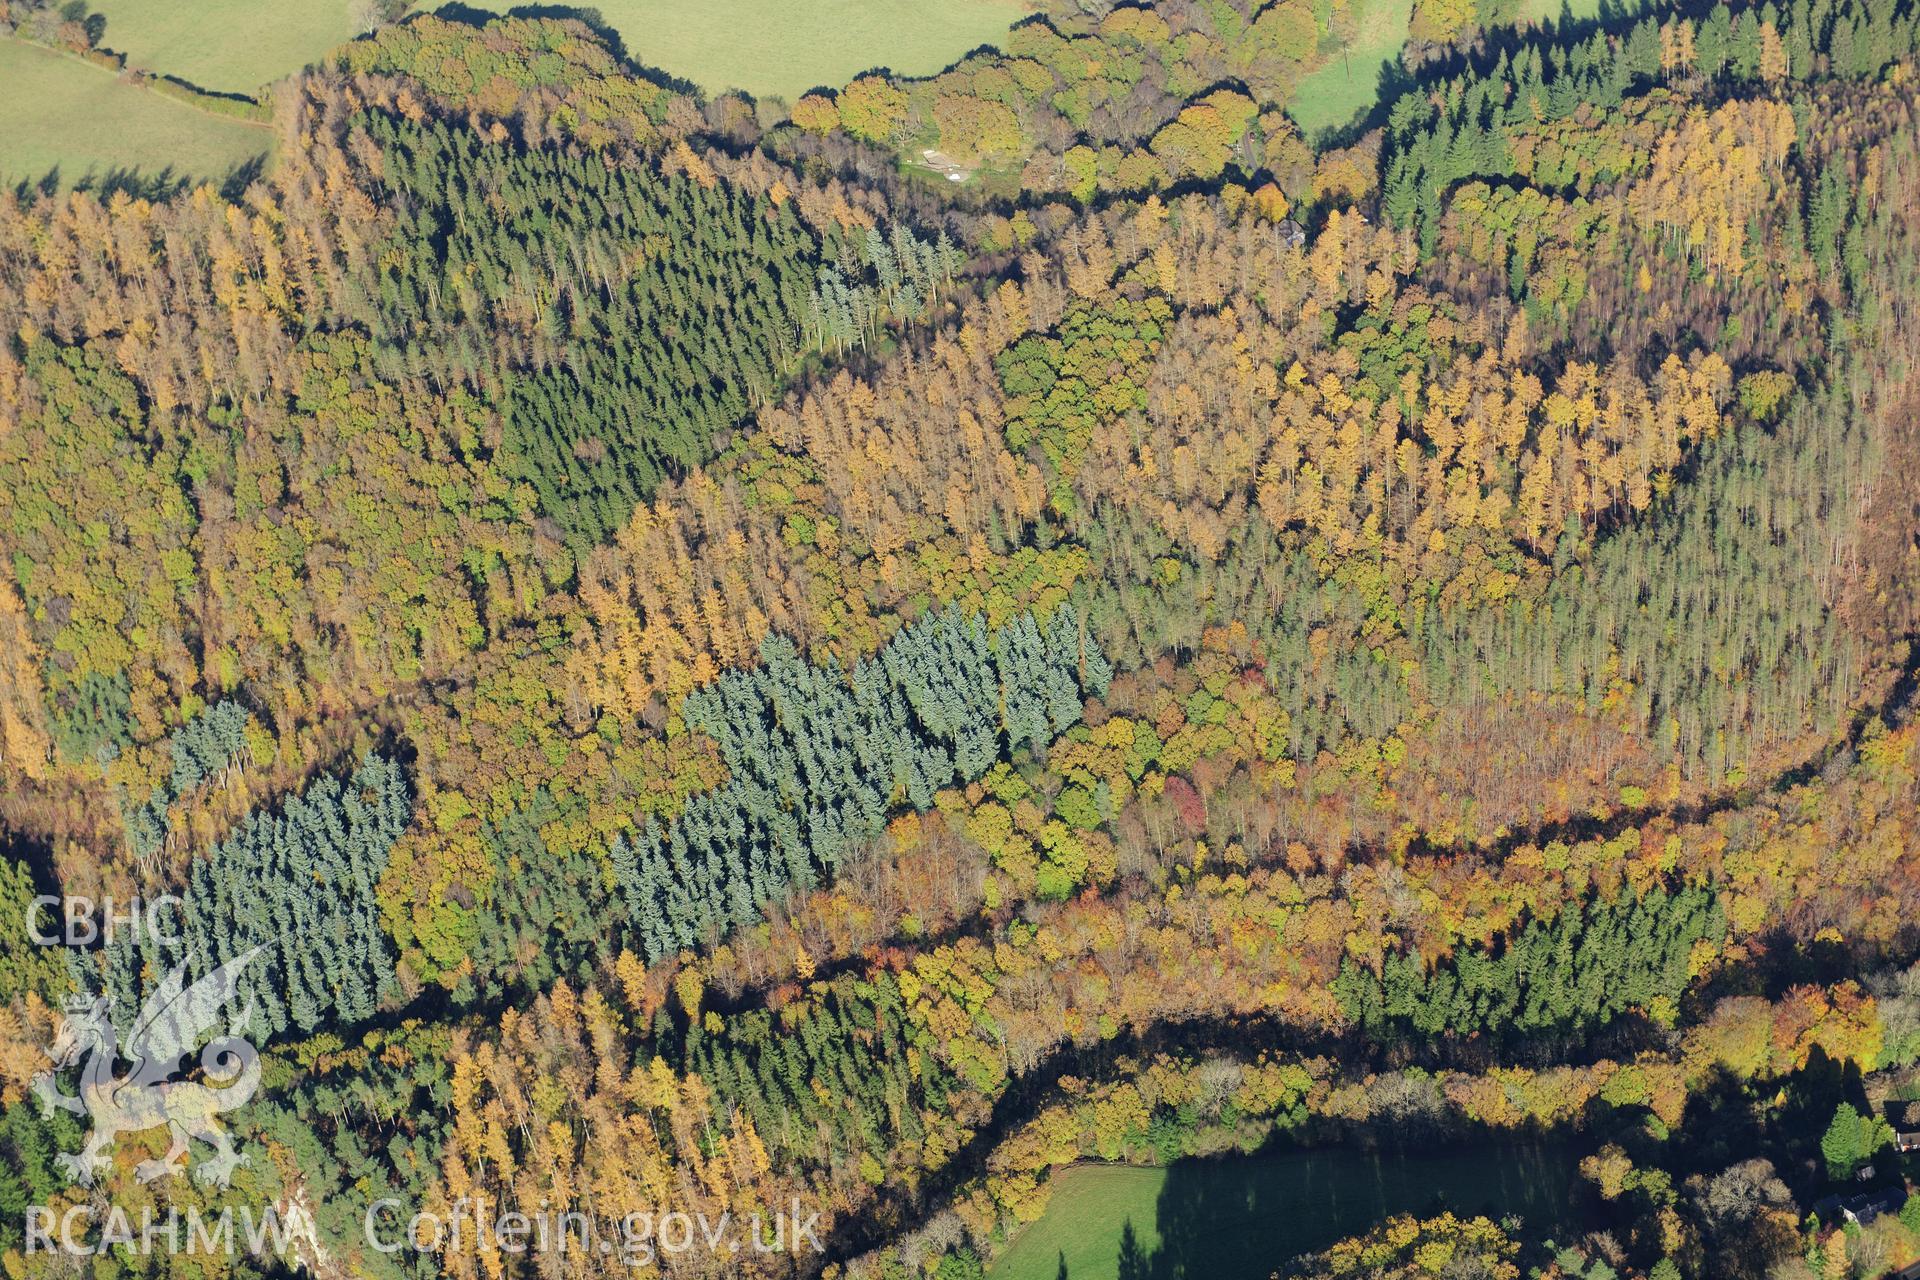 RCAHMW colour oblique photograph of Coed Maen Arthur, forestry with autumn colours. Taken by Toby Driver on 05/11/2012.